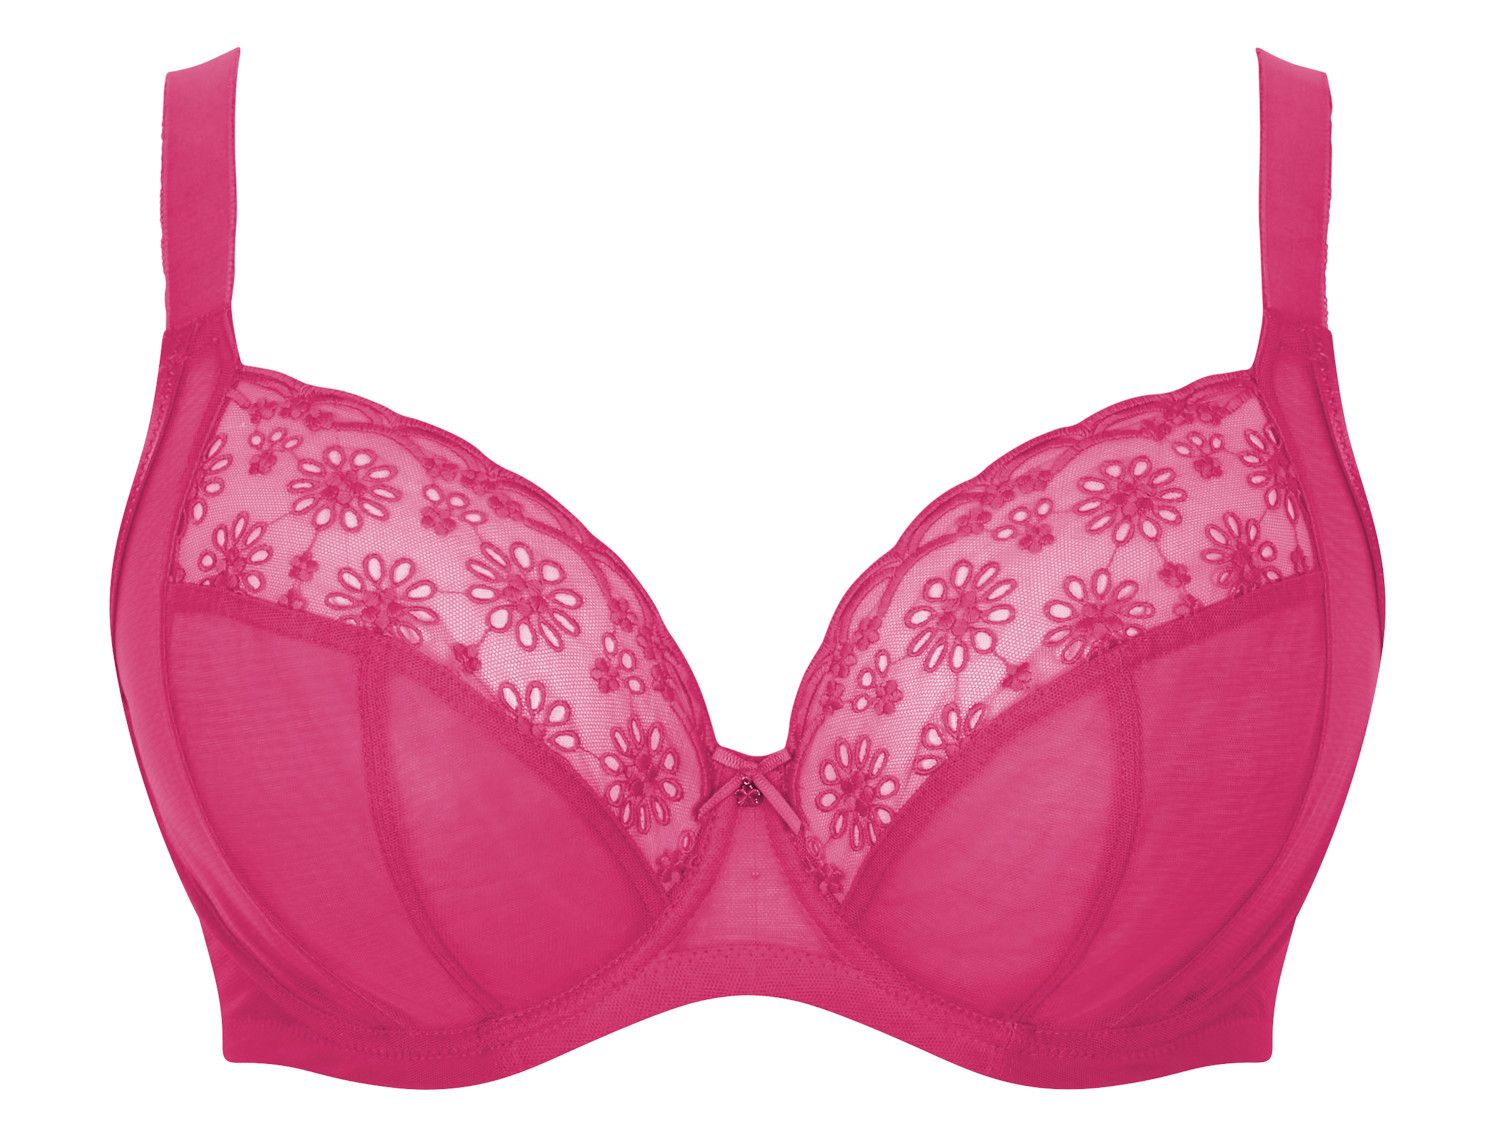 BNWT Fantasie Eclipse Moulded Cup Bra Size 34D Hibiscus #FL9002HIS